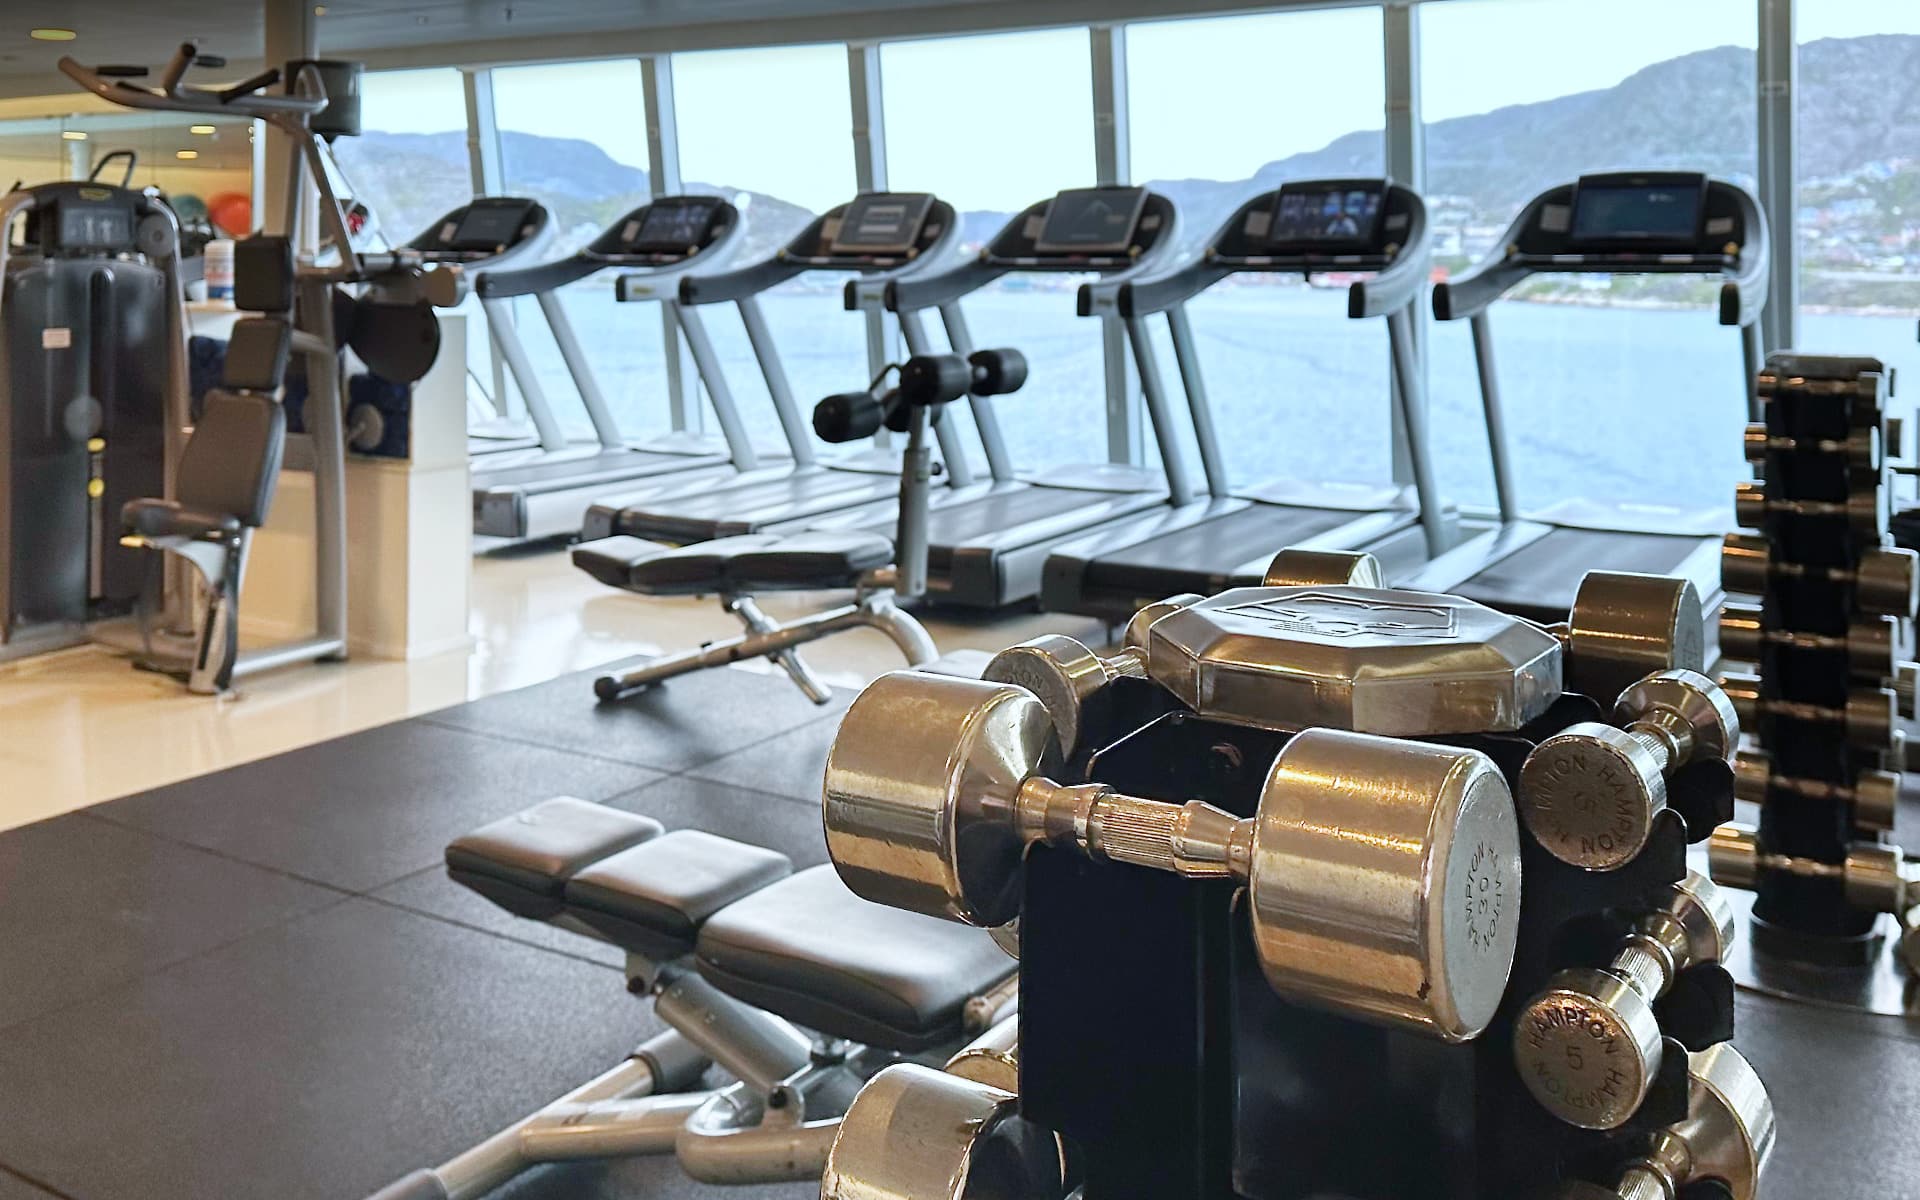 The gym onboard Oceania's Riviera cruise ship.